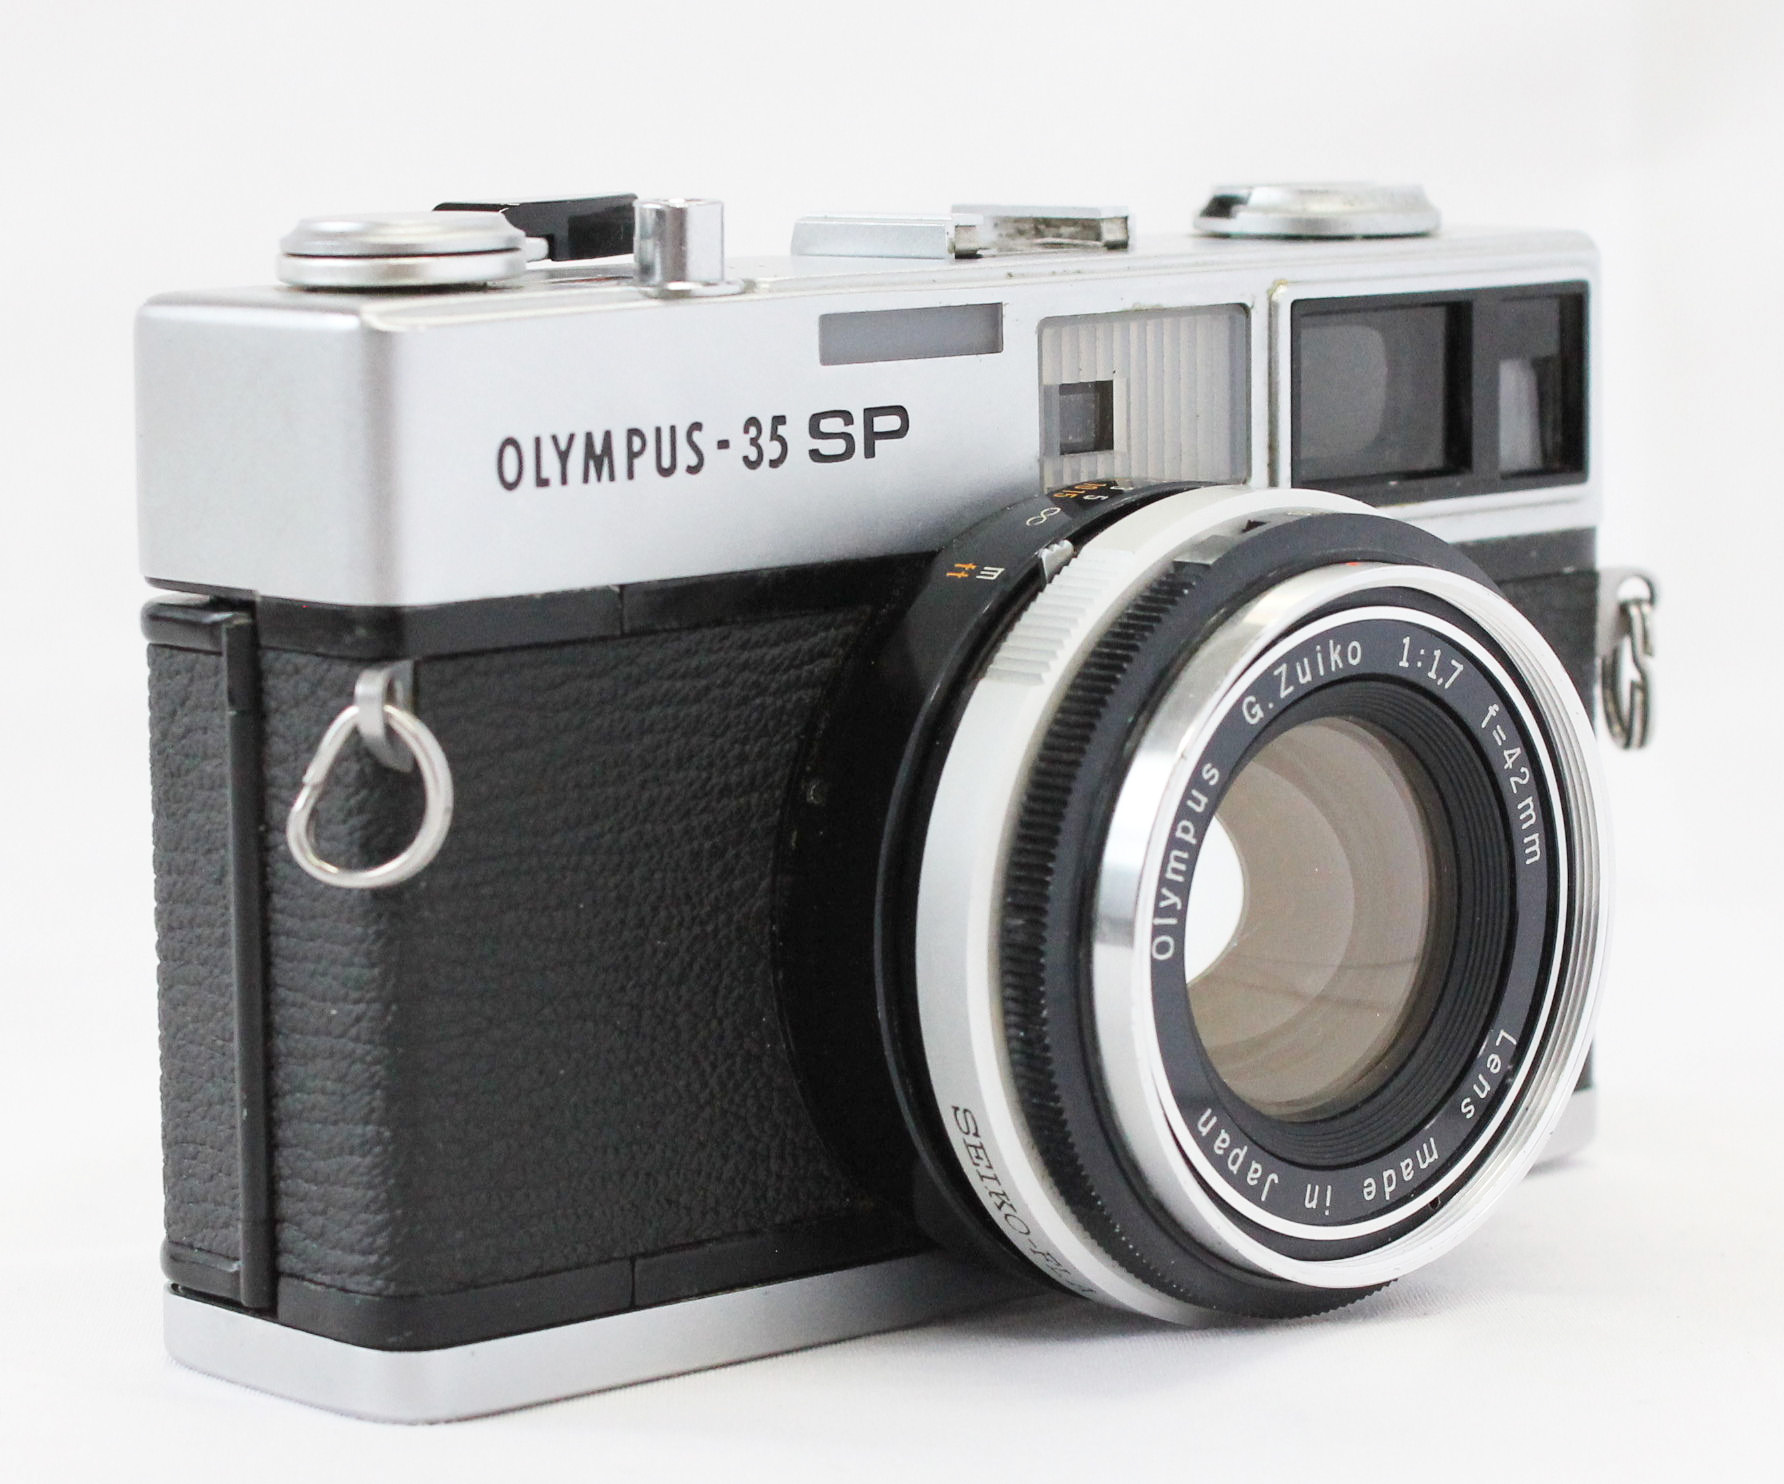  Olympus 35 SP 35mm Rangefinder Film Camera with G.Zuiko 42mm F1.7 Lens from Japan Photo 1